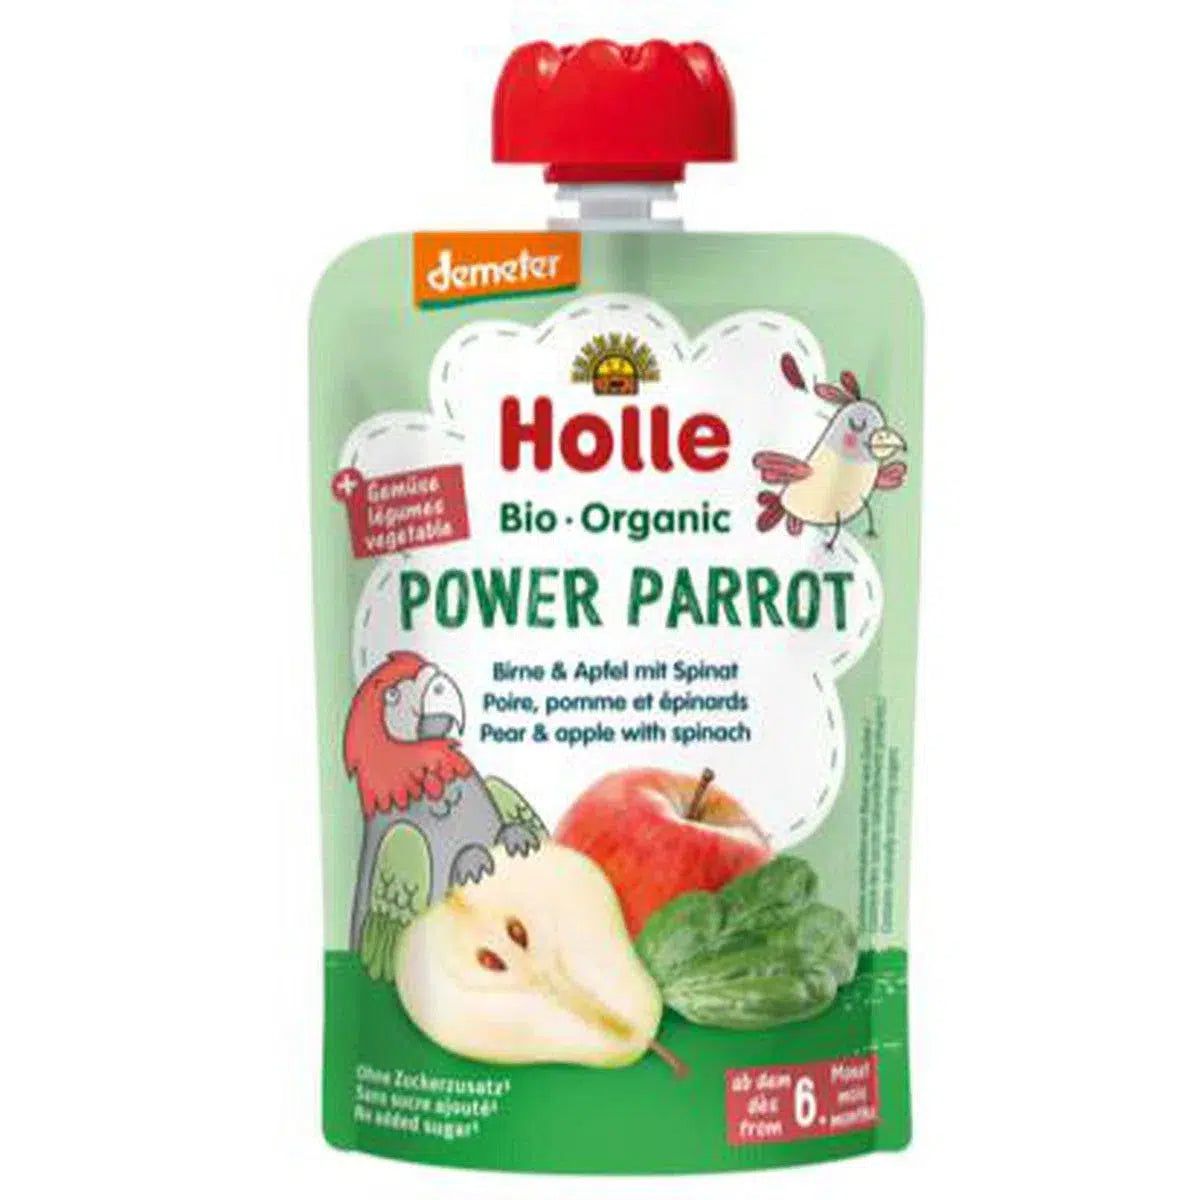 Power Parrot - Pear & Apple with Spinach (100g), from 6 months